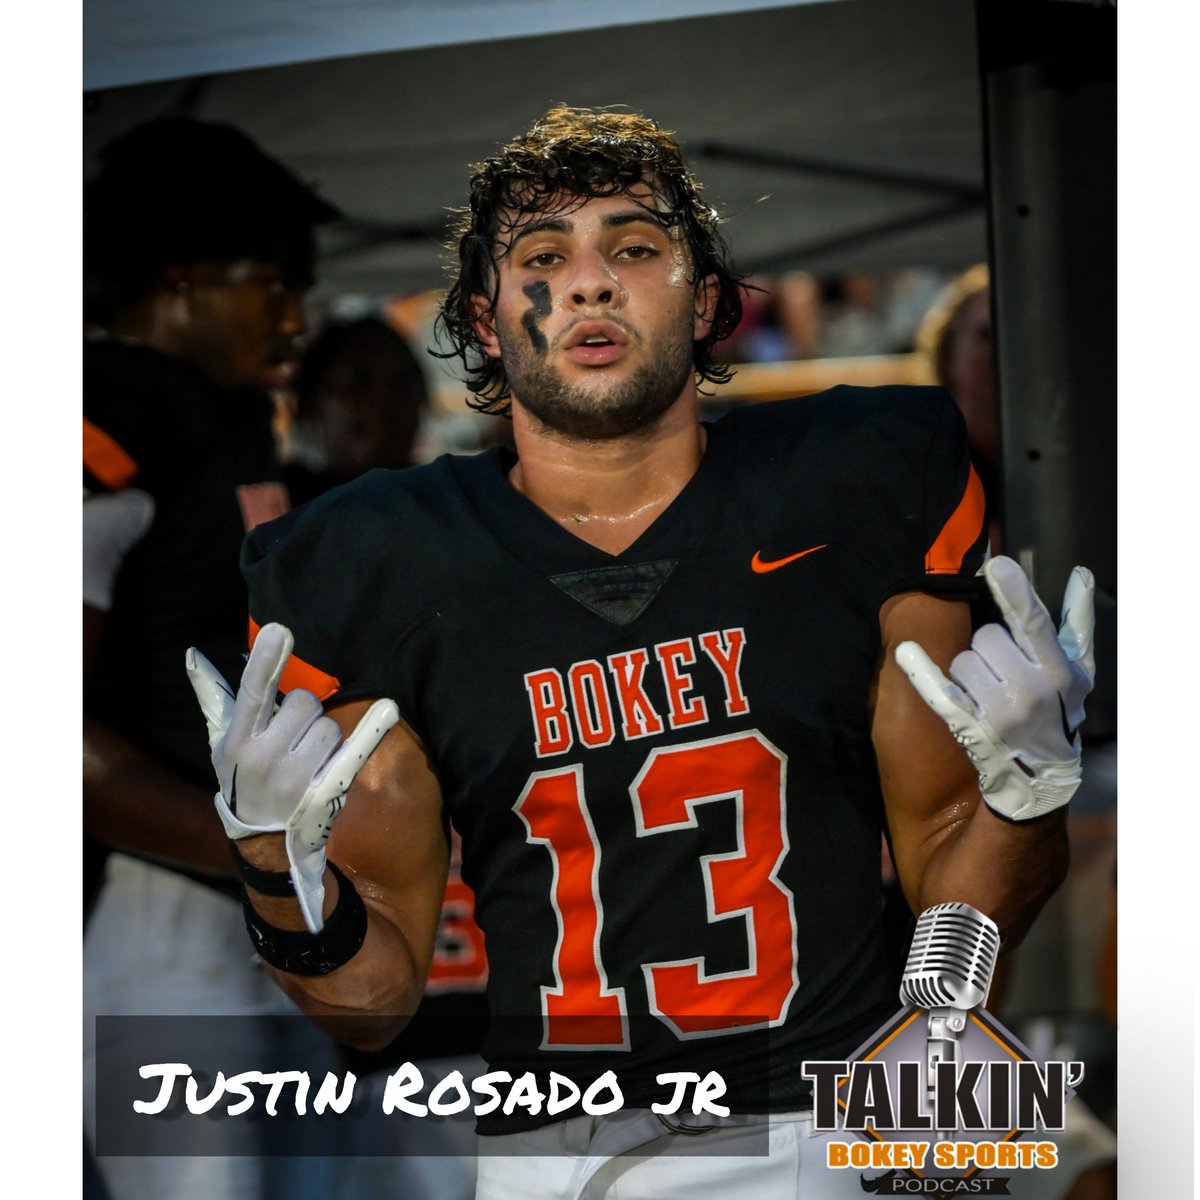 The player of the game is Justin Rosado. @jjetty_13 had 2 touchdowns tonight, including a 50-yard punt return.